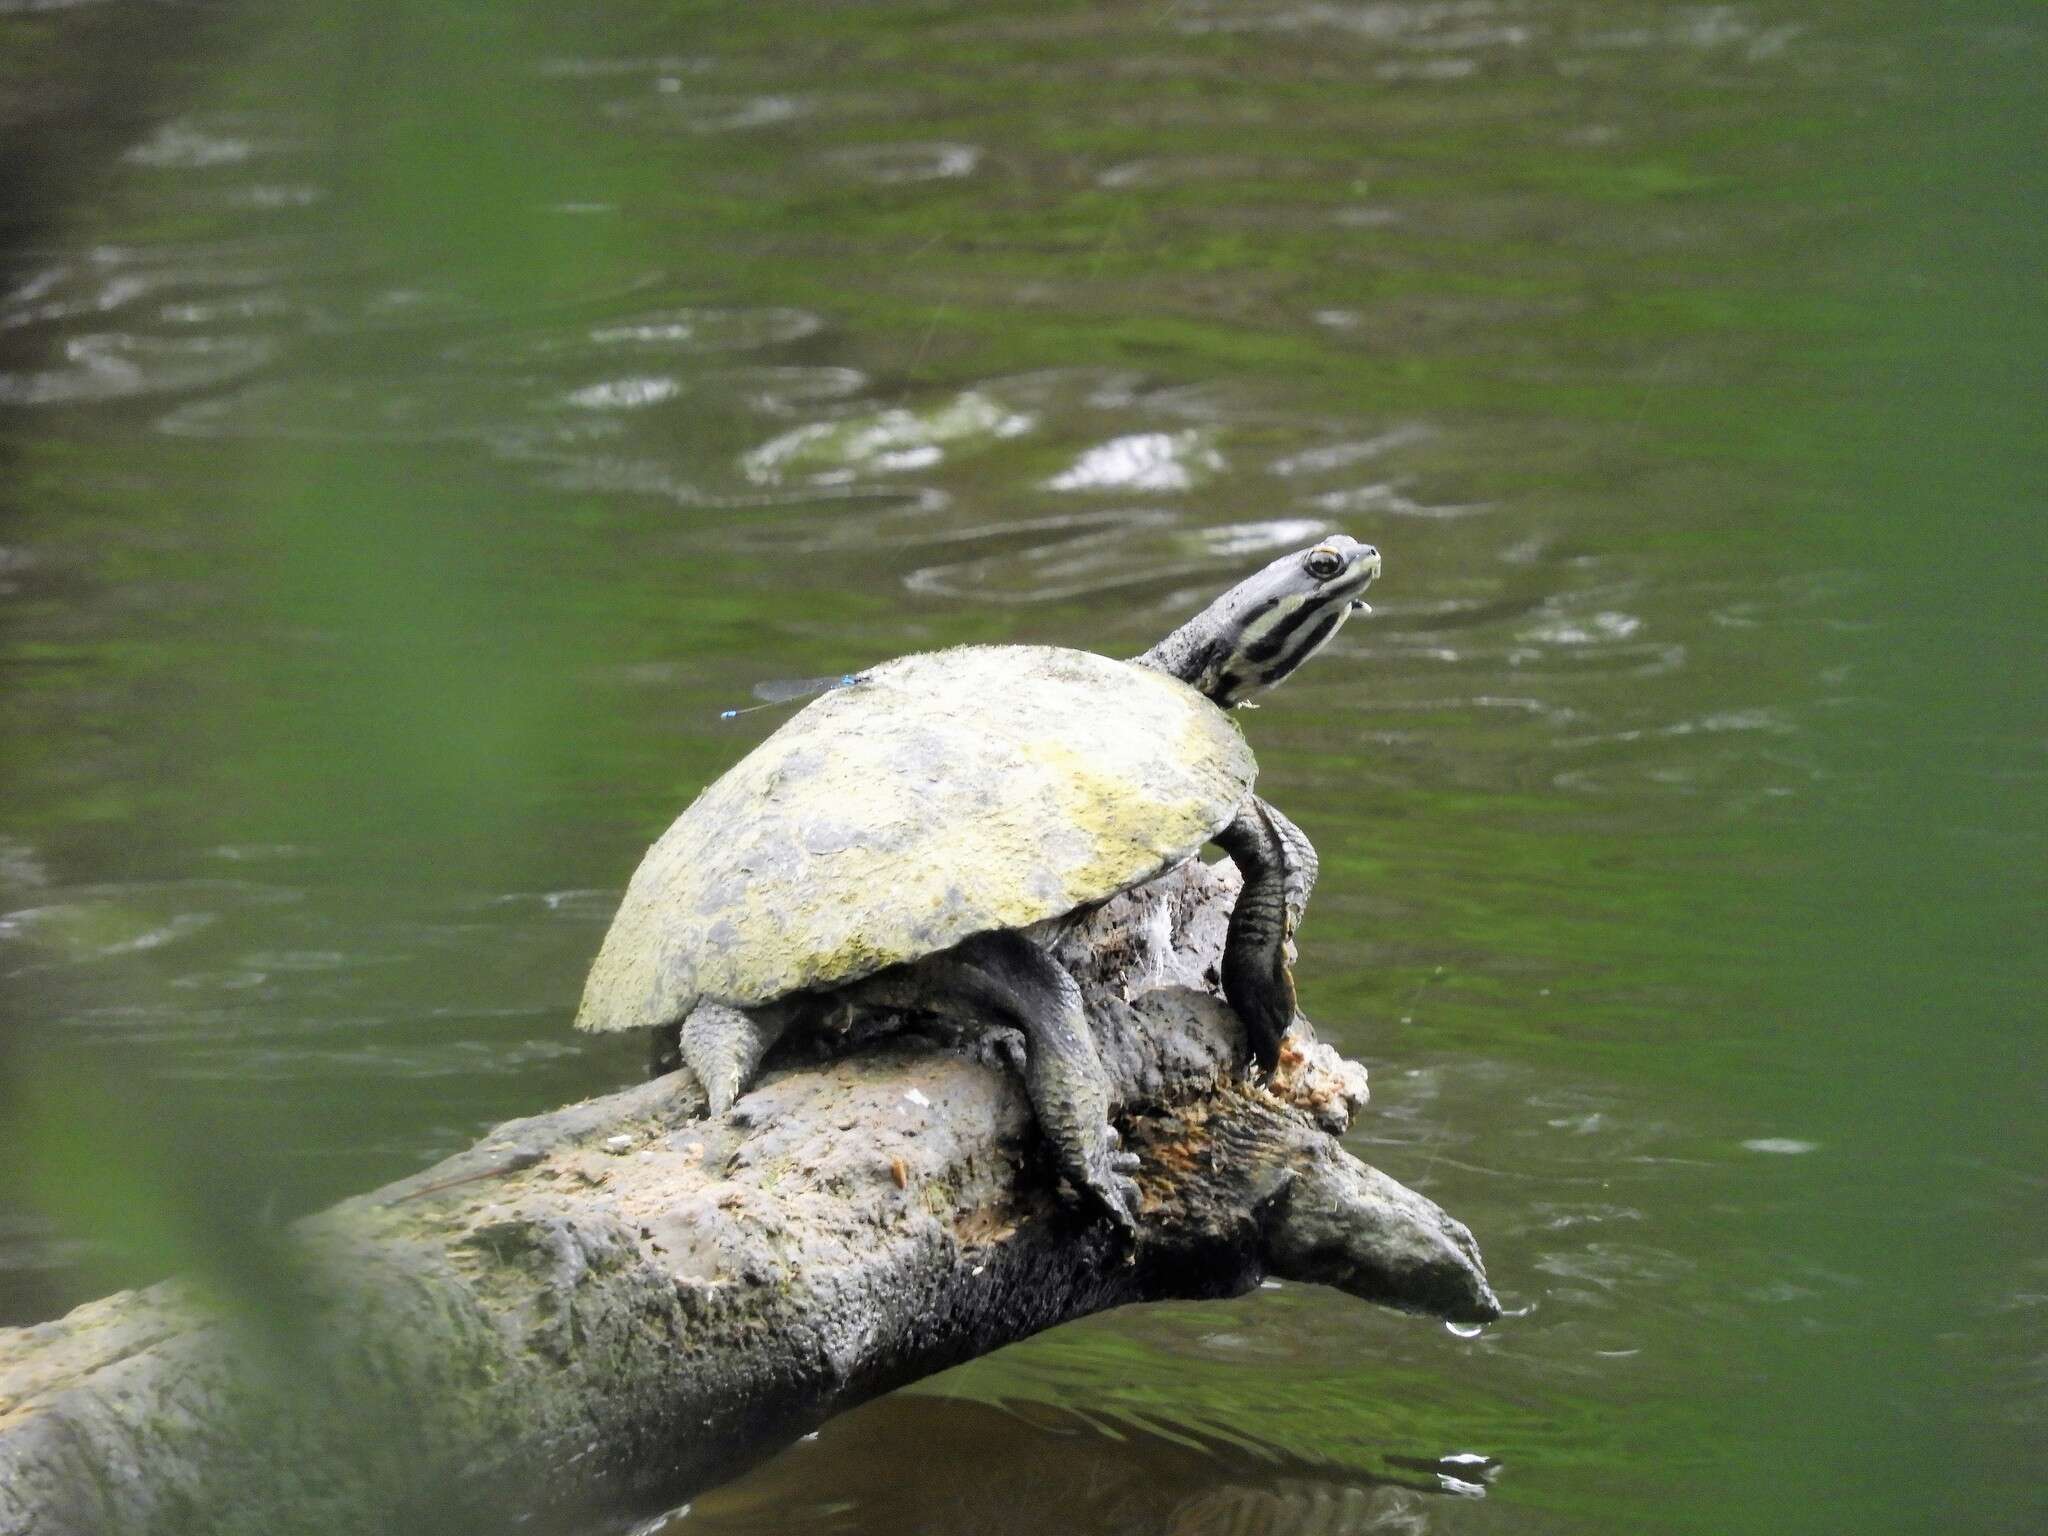 Image of William’s South-American Side-necked Turtle